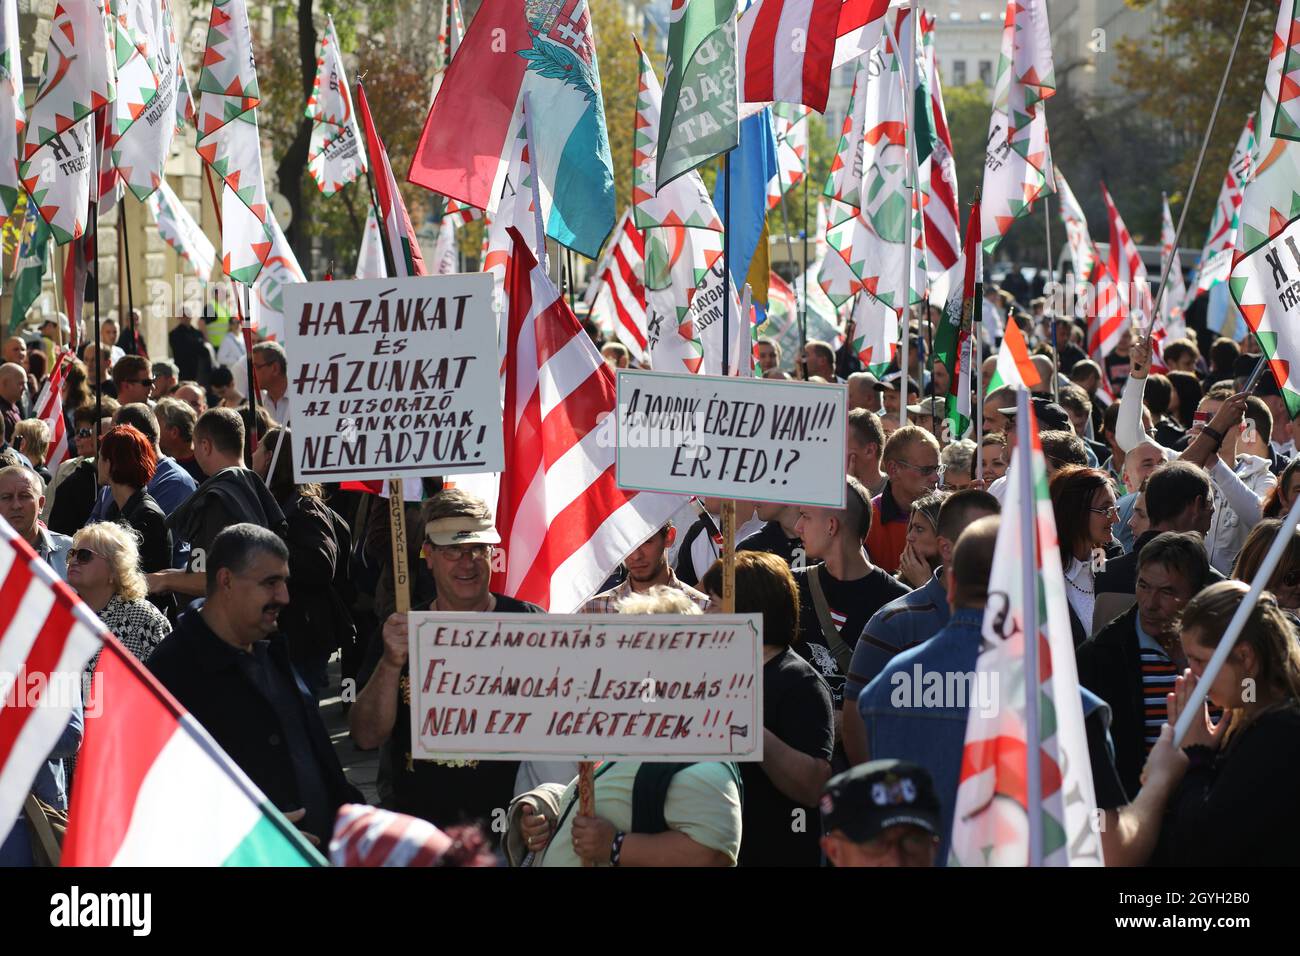 A political gathering of the Jobbik party in downtown Budapest on the national holiday of October 23. Stock Photo